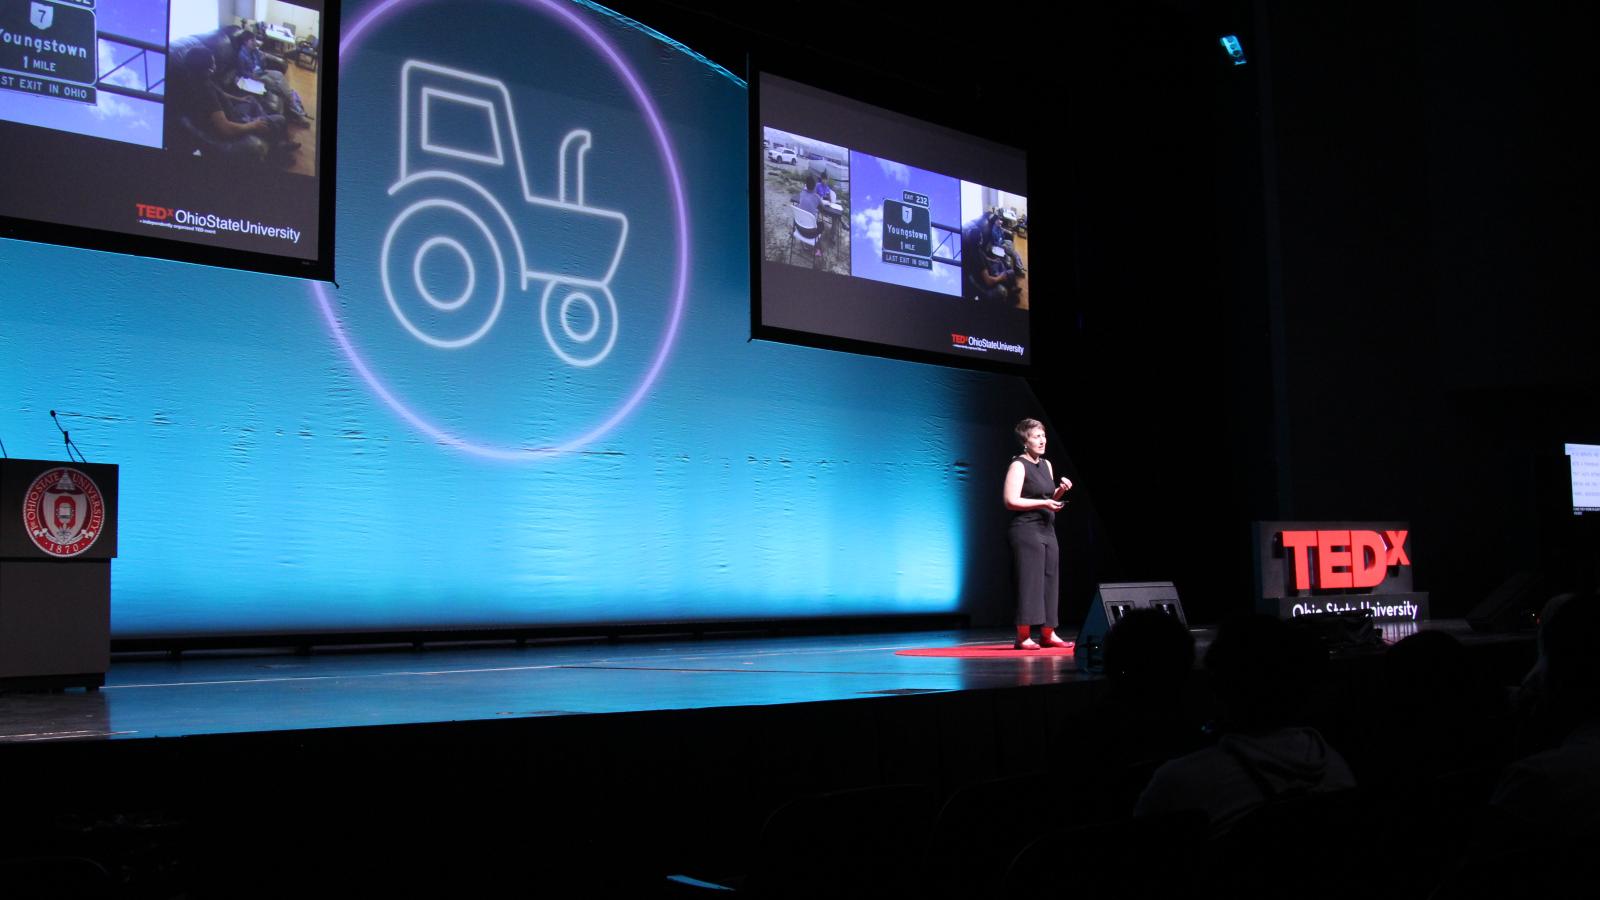 Dr. Anisa Kline presents at TEDx Ohio State